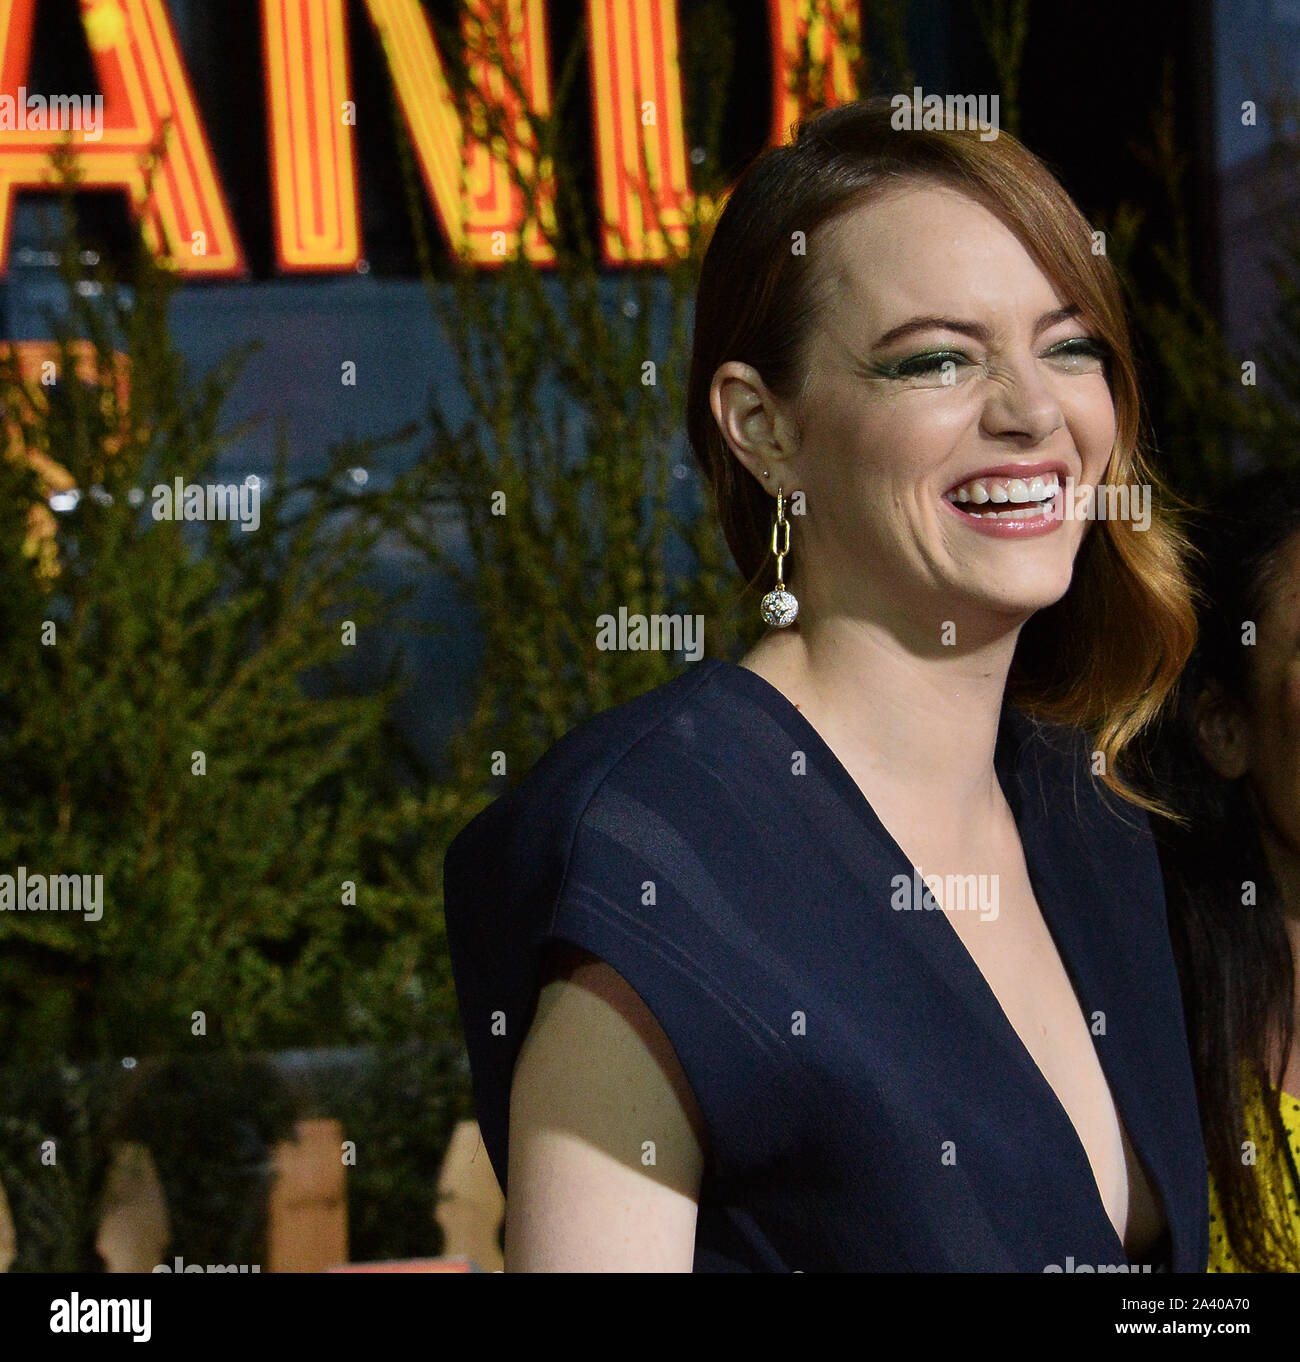 Los Angeles, United States. 10th Oct, 2019. Cast member Emma Stone attends the premiere of the motion picture horror comedy 'Zombieland: Double Tap' at the Regency Village Theatre in the Westwood section of Los Angeles on Thursday, October 10, 2019. Storyline: Columbus, Tallahassee, Wichita, and Little Rock move to the American heartland as they face off against evolved zombies, fellow survivors, and the growing pains of the snarky makeshift family. Photo by Jim Ruymen/UPI Credit: UPI/Alamy Live News Stock Photo